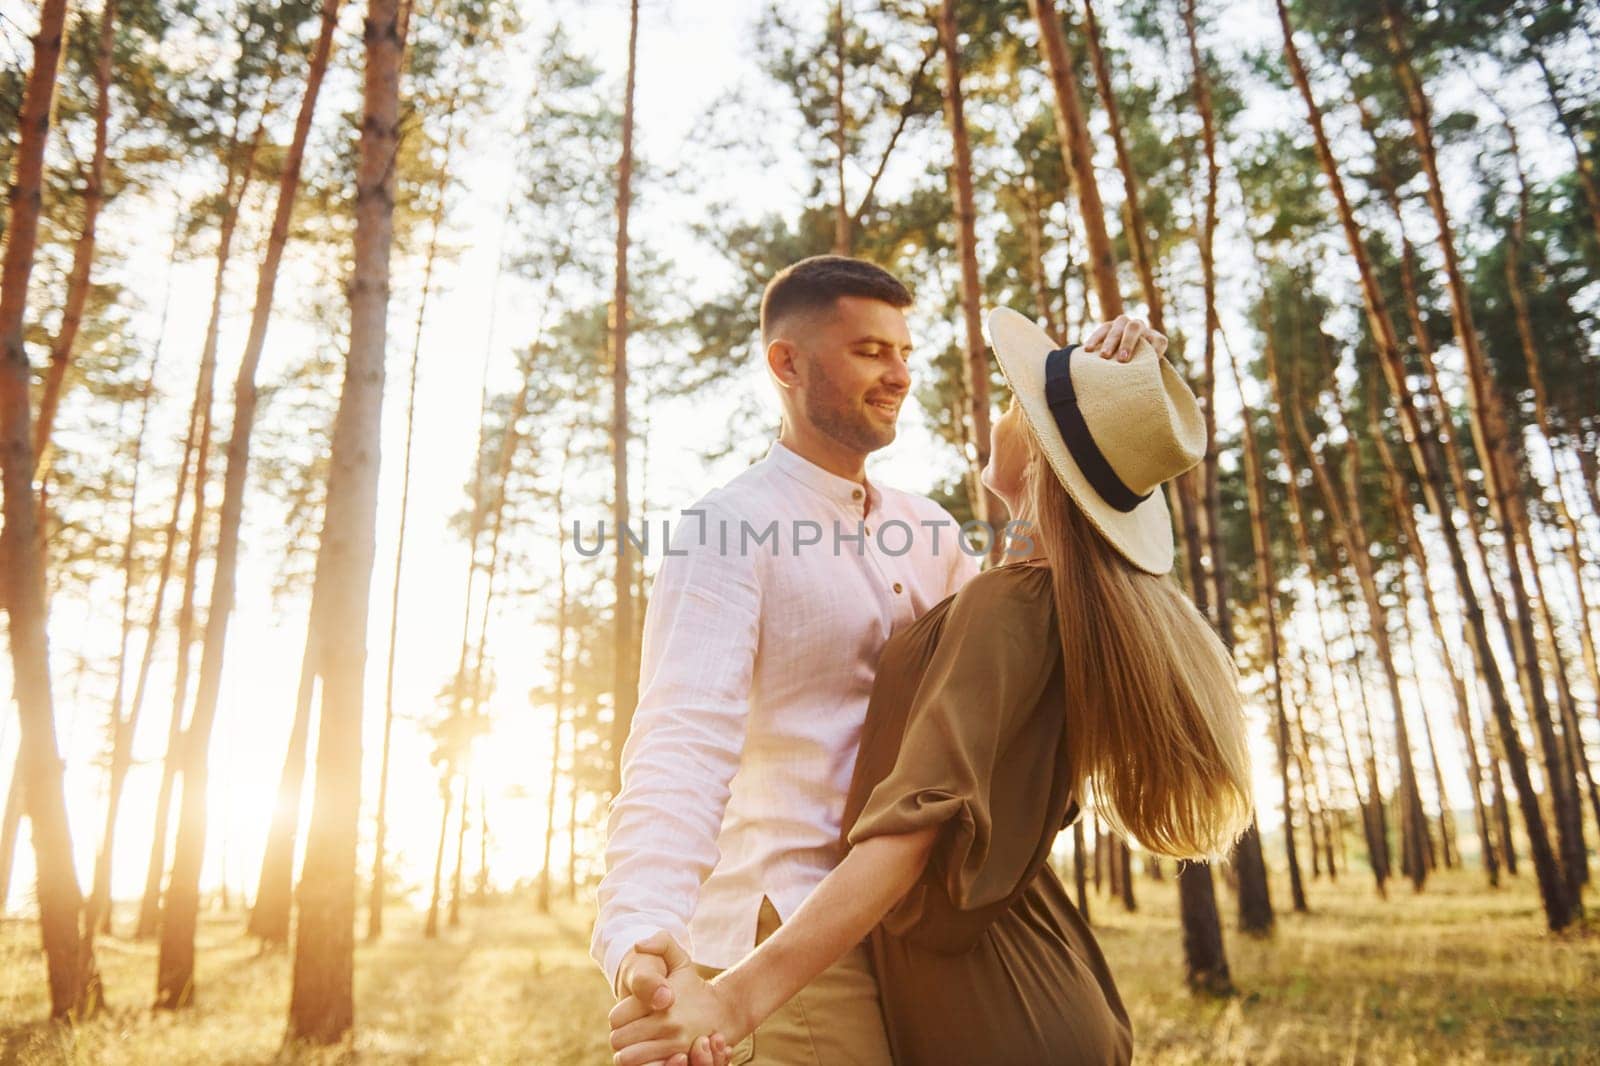 Holding each other by the hands. Happy couple is outdoors in the forest at daytime.